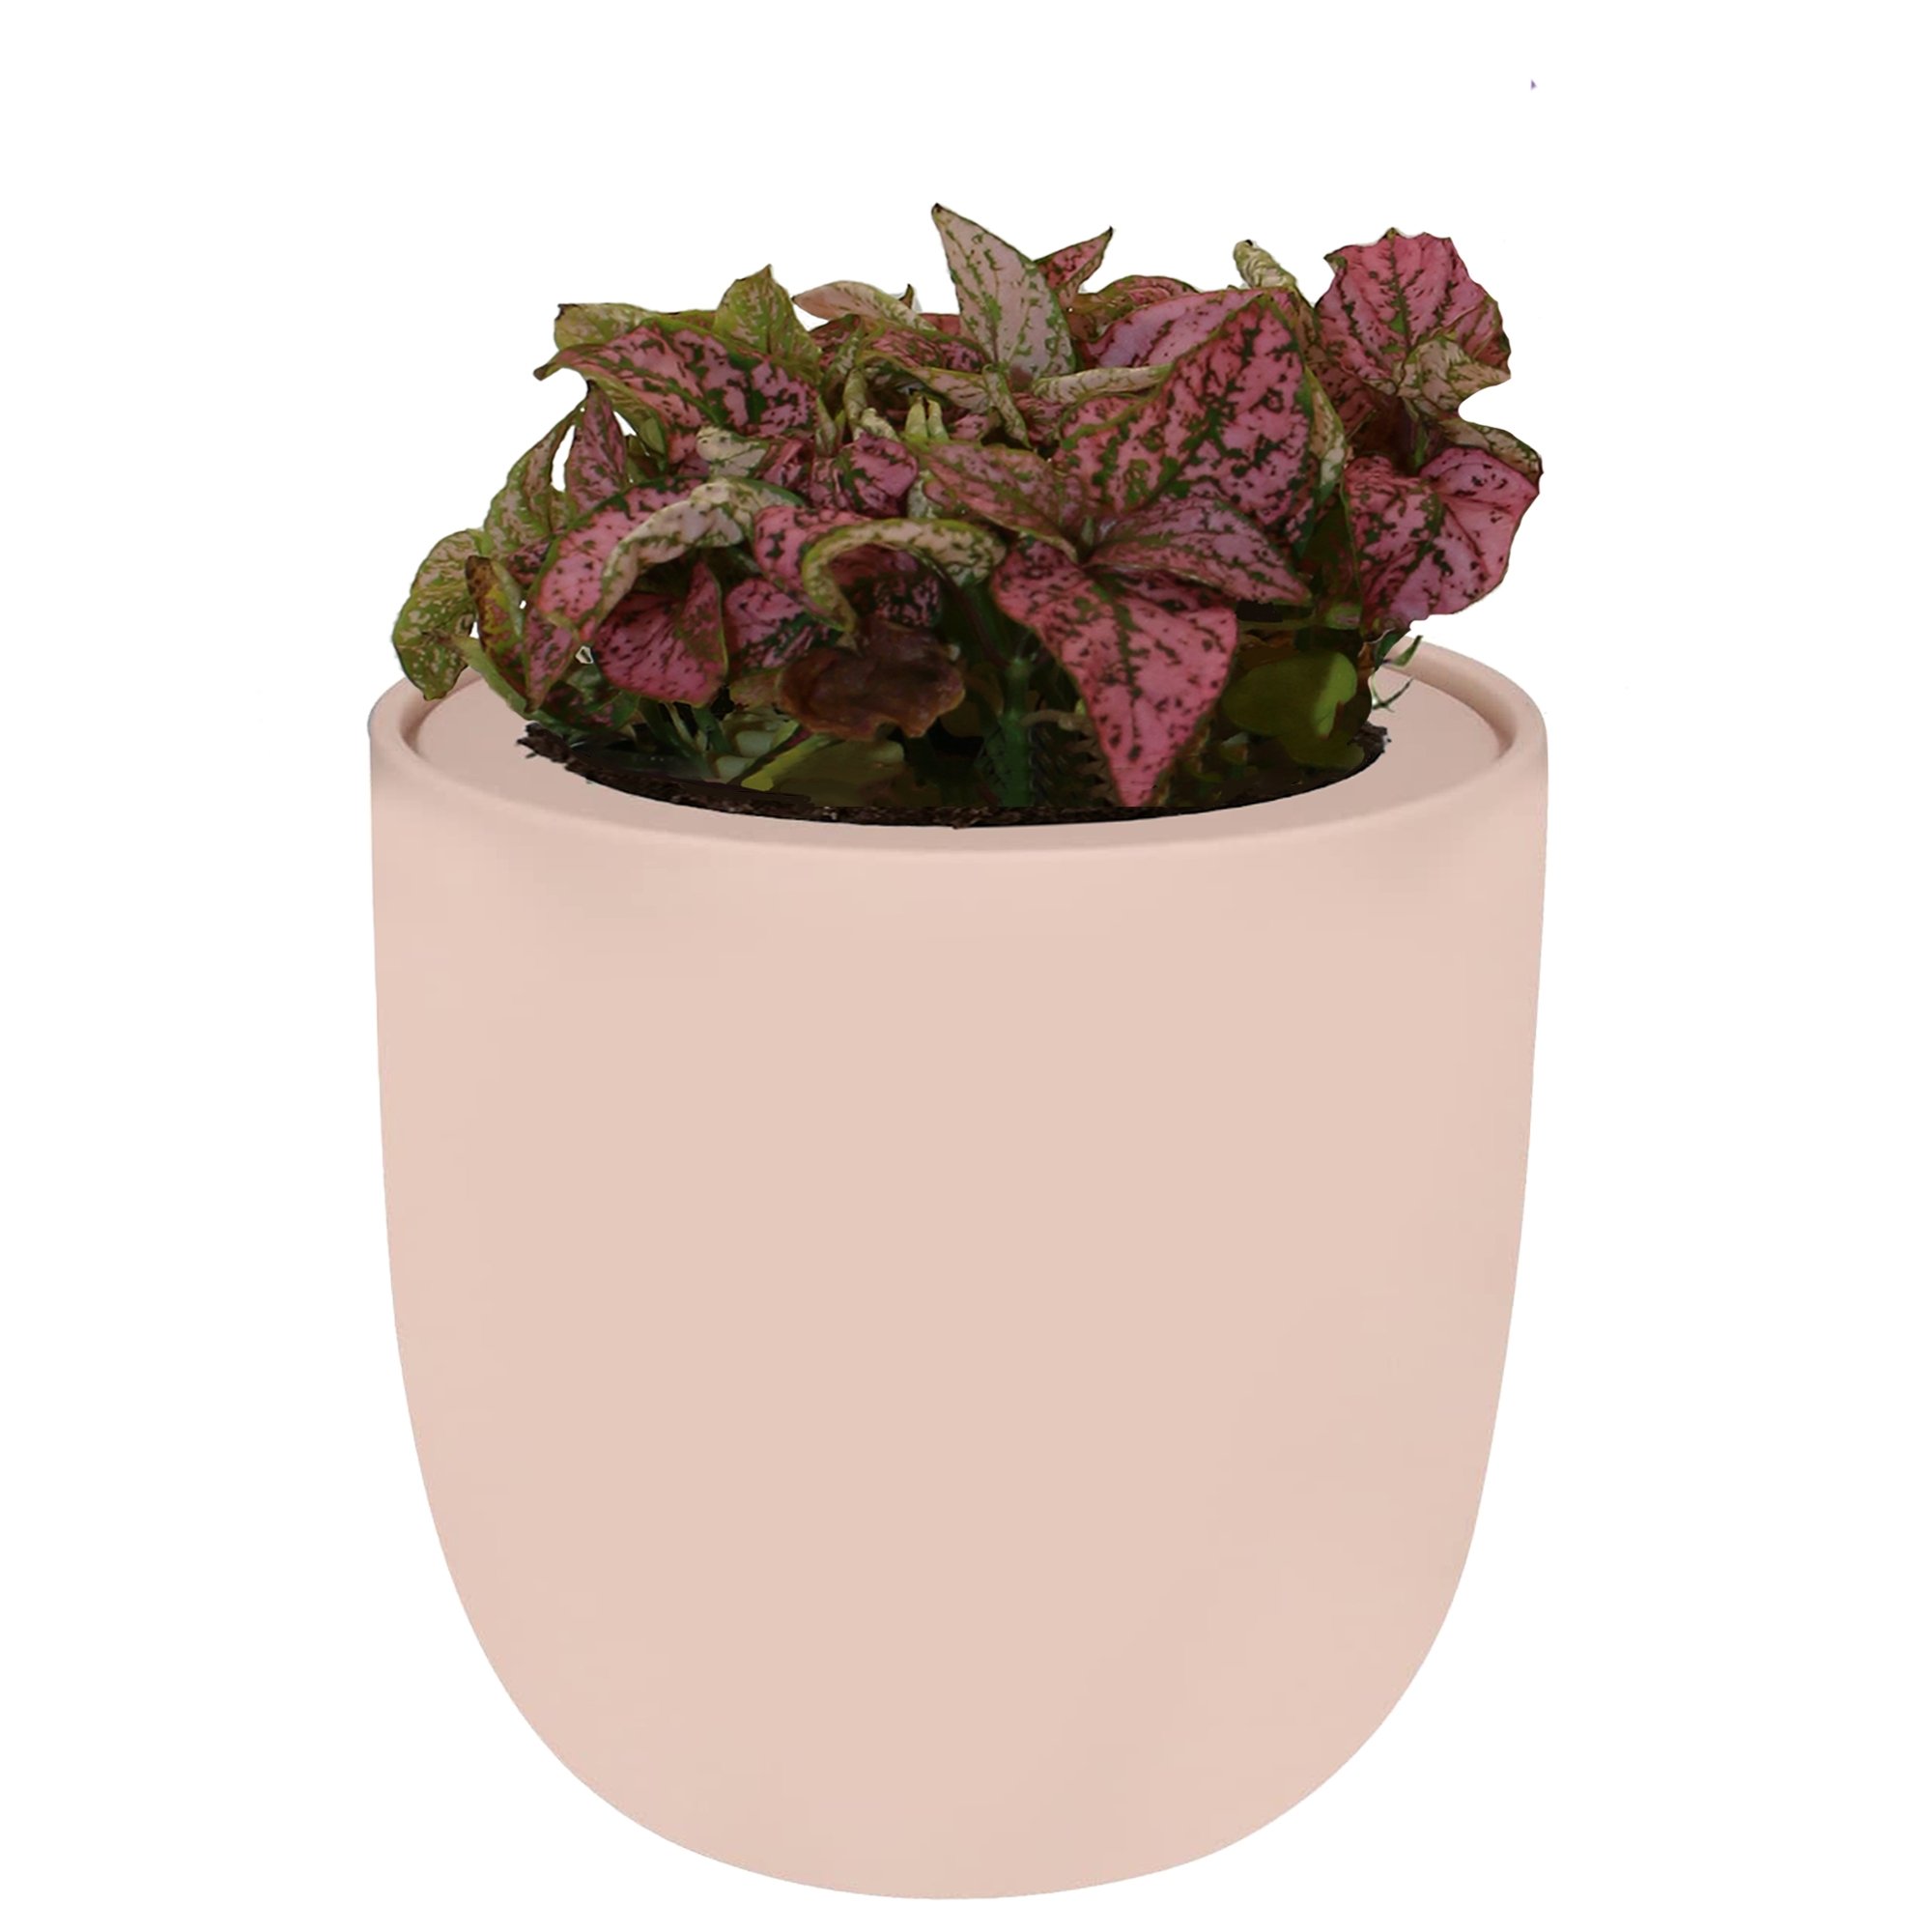 Polka Dot Hypoestes Pink Ceramic Pot Hydroponic Growing Kit with Seeds